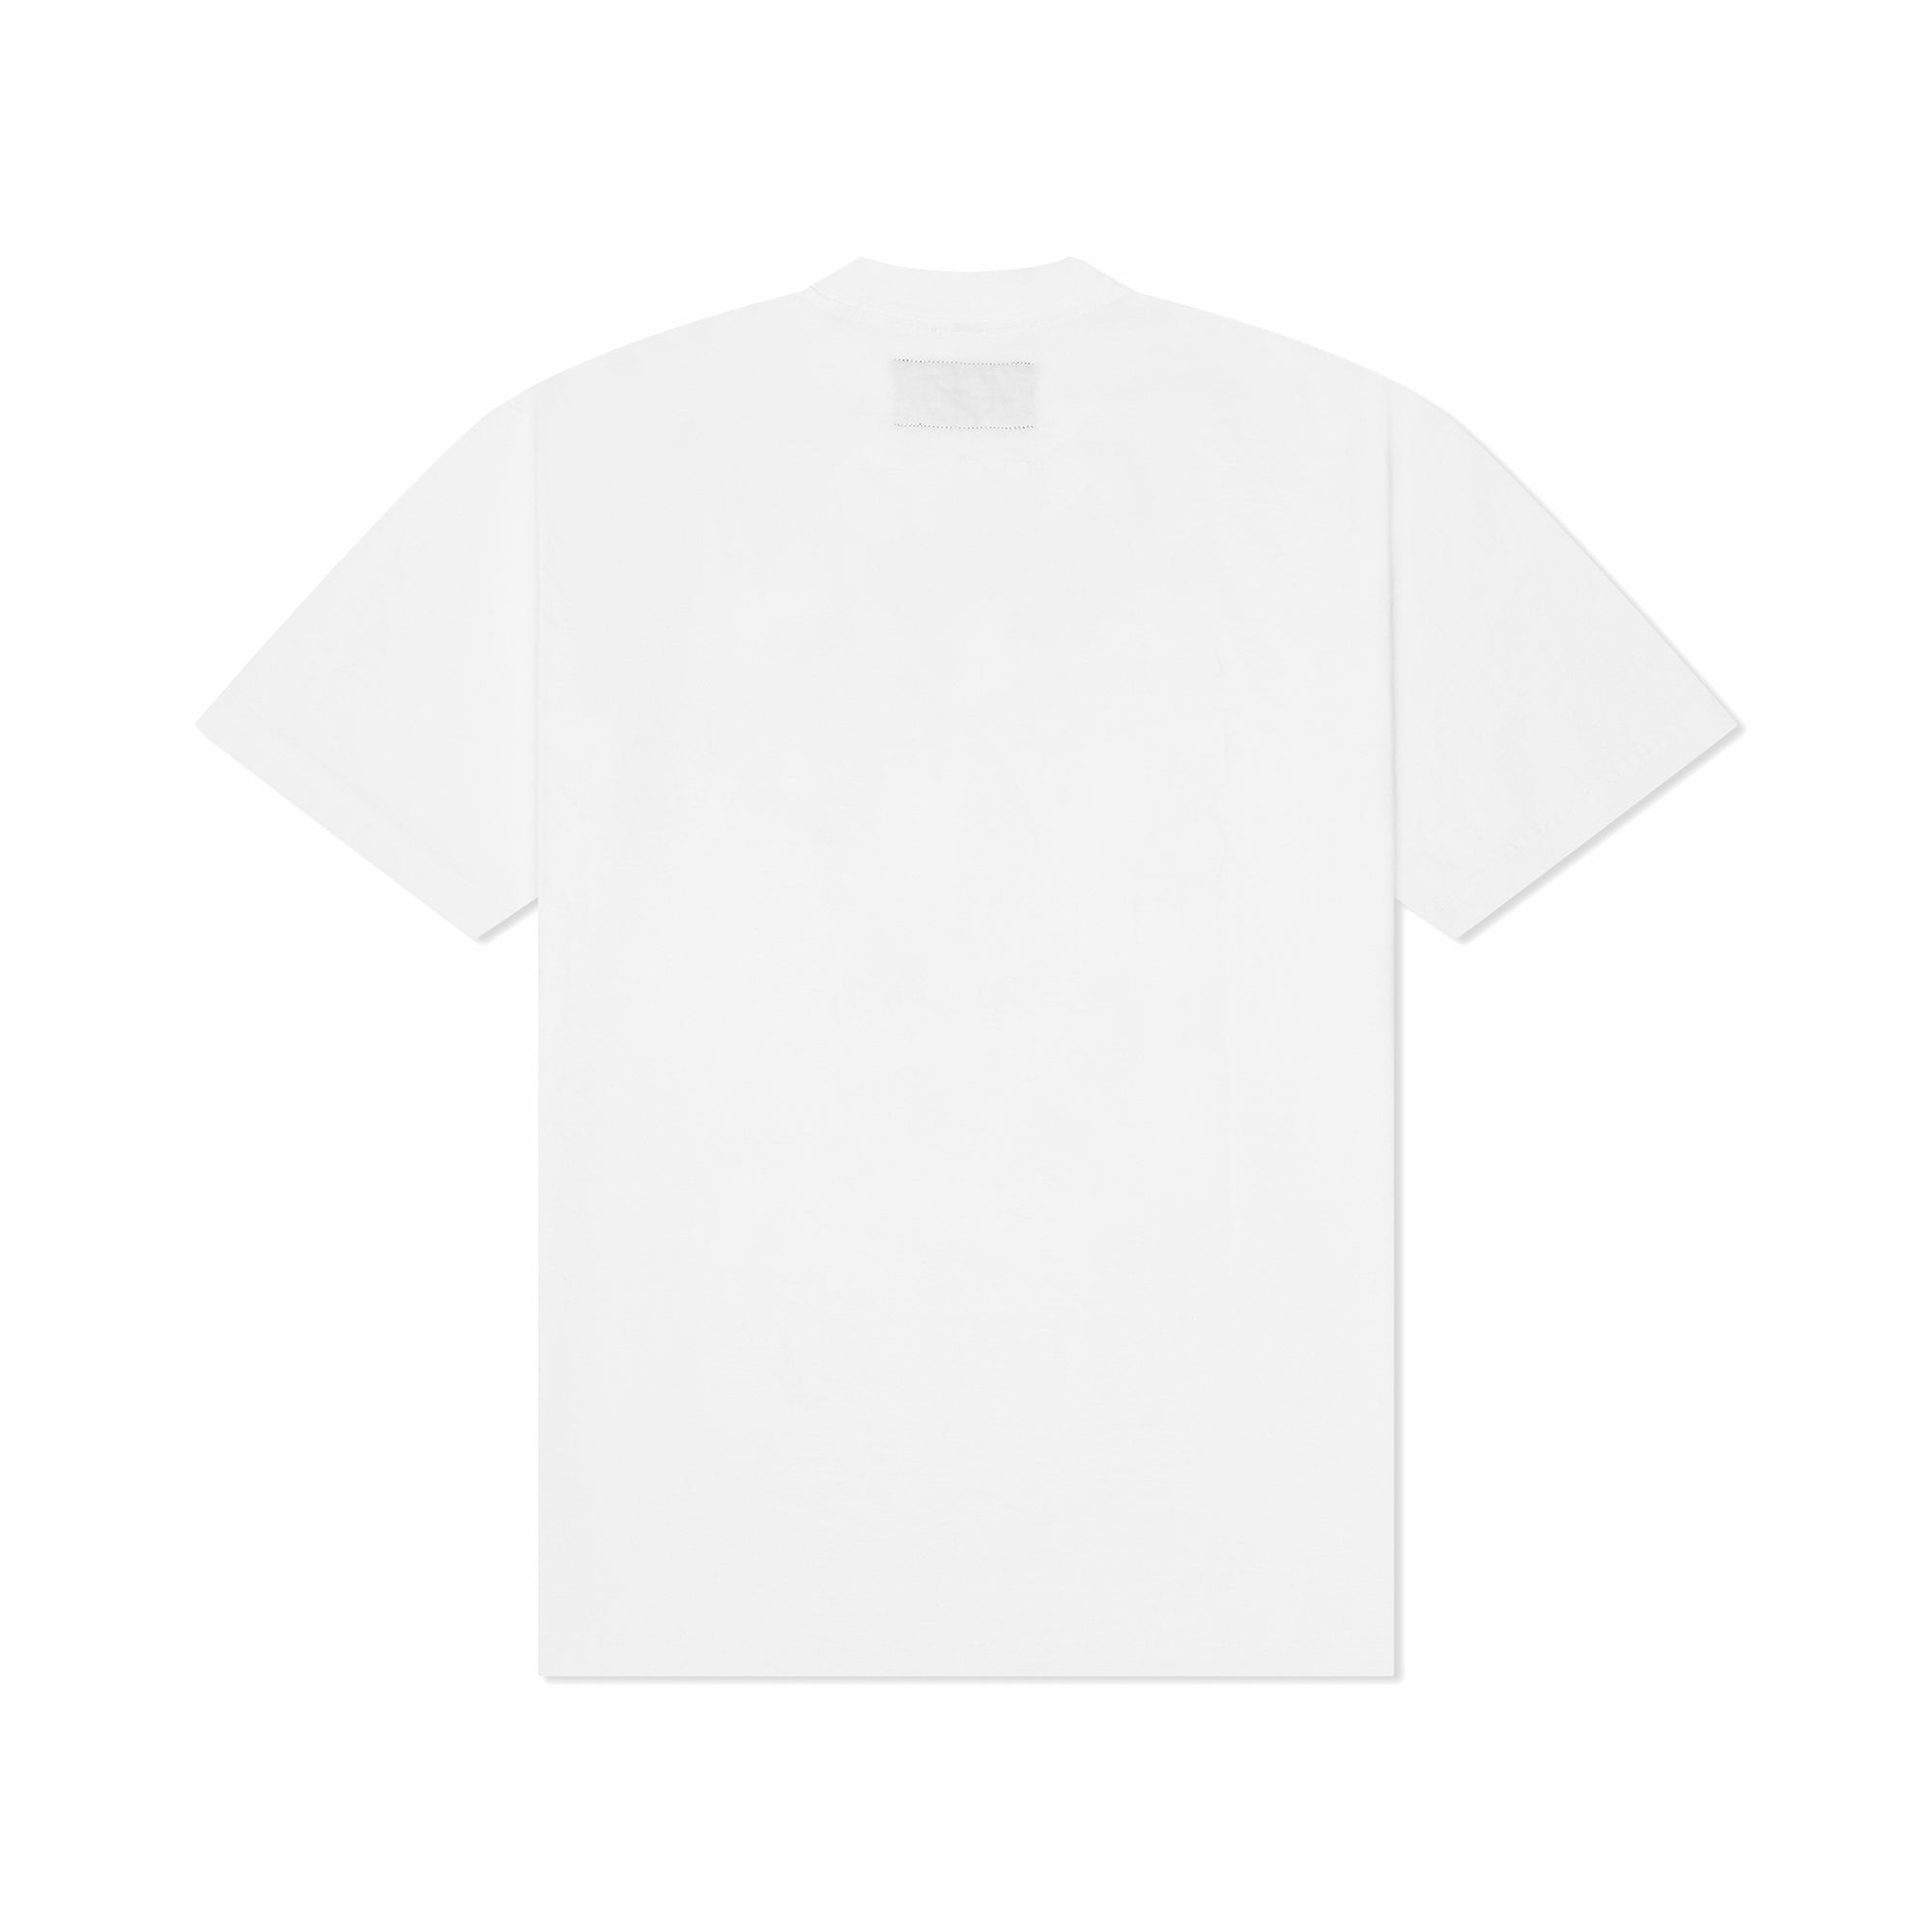 Funeral Flowers - White Tee